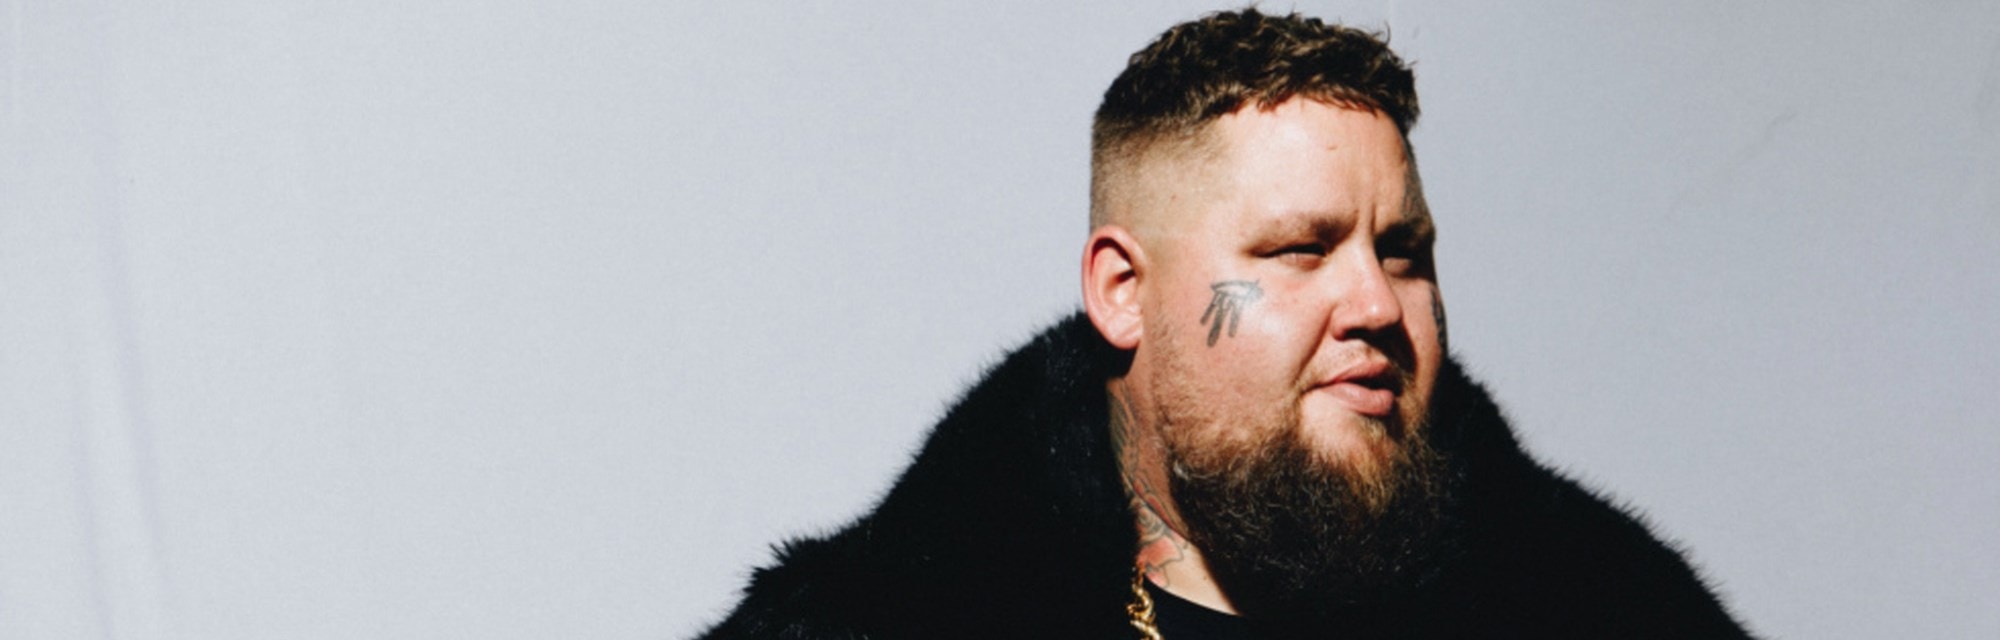 Rag 'n' Bone Man returns this week with the follow-up to his debut ...